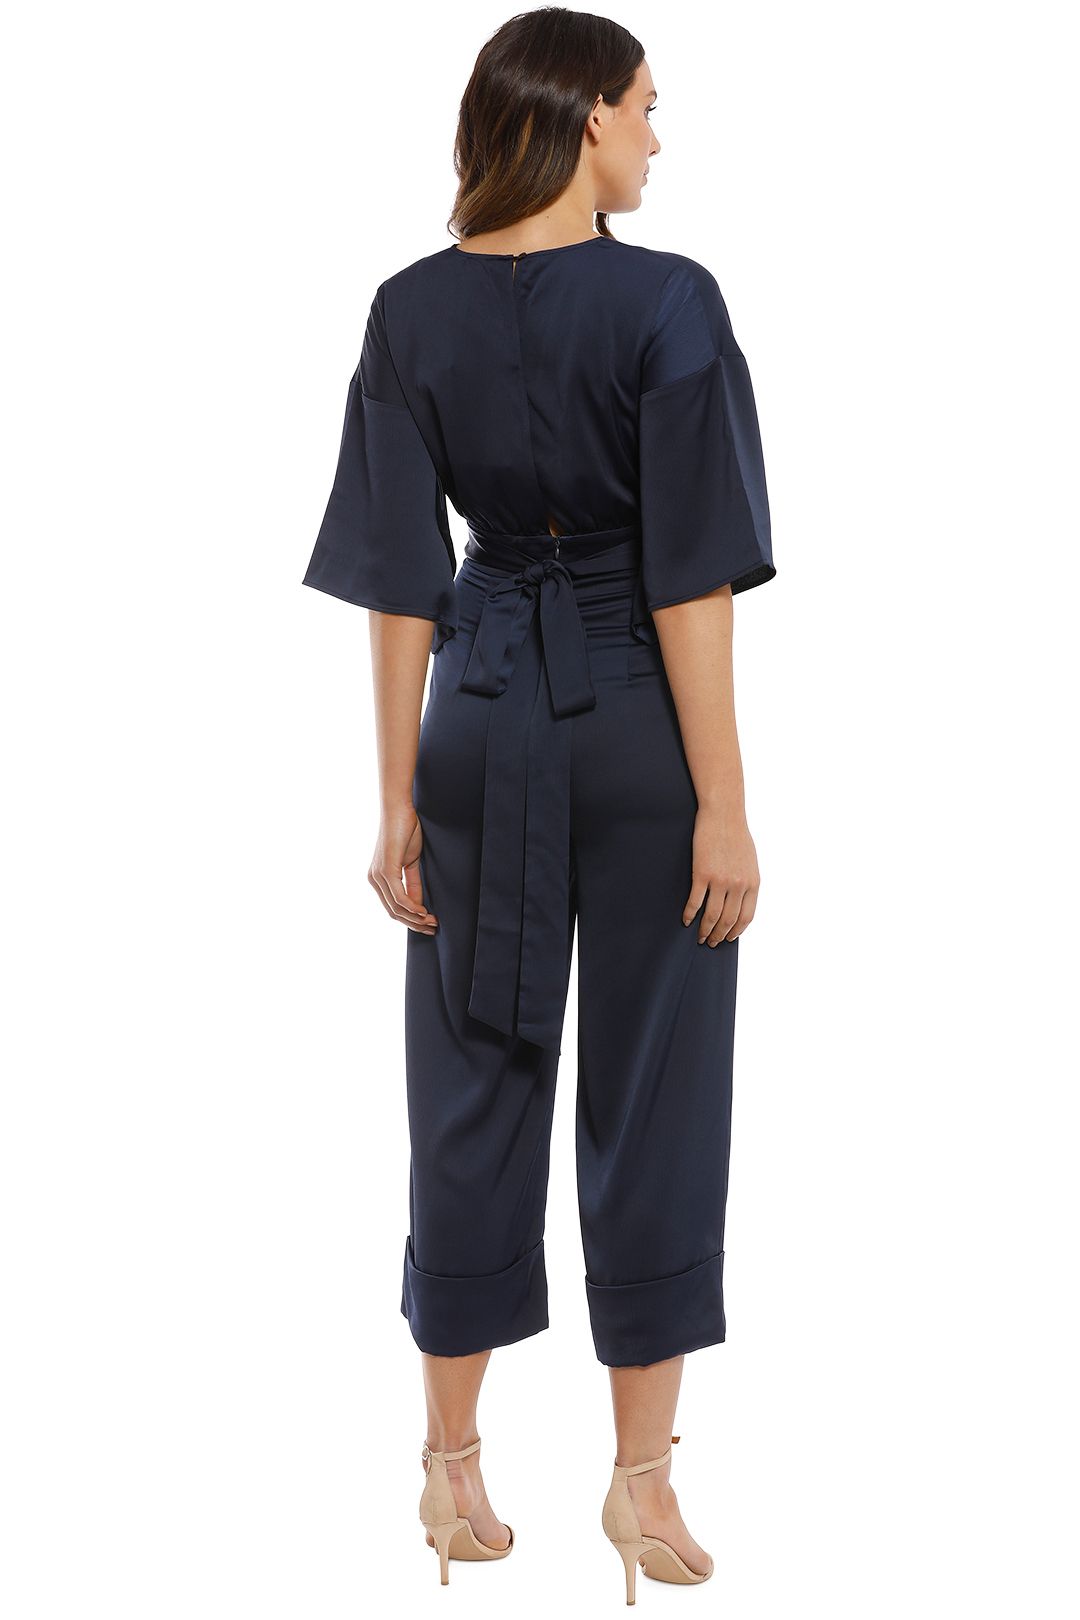 Iris and Ink - Sidney Satin Jumpsuit - Navy - Back